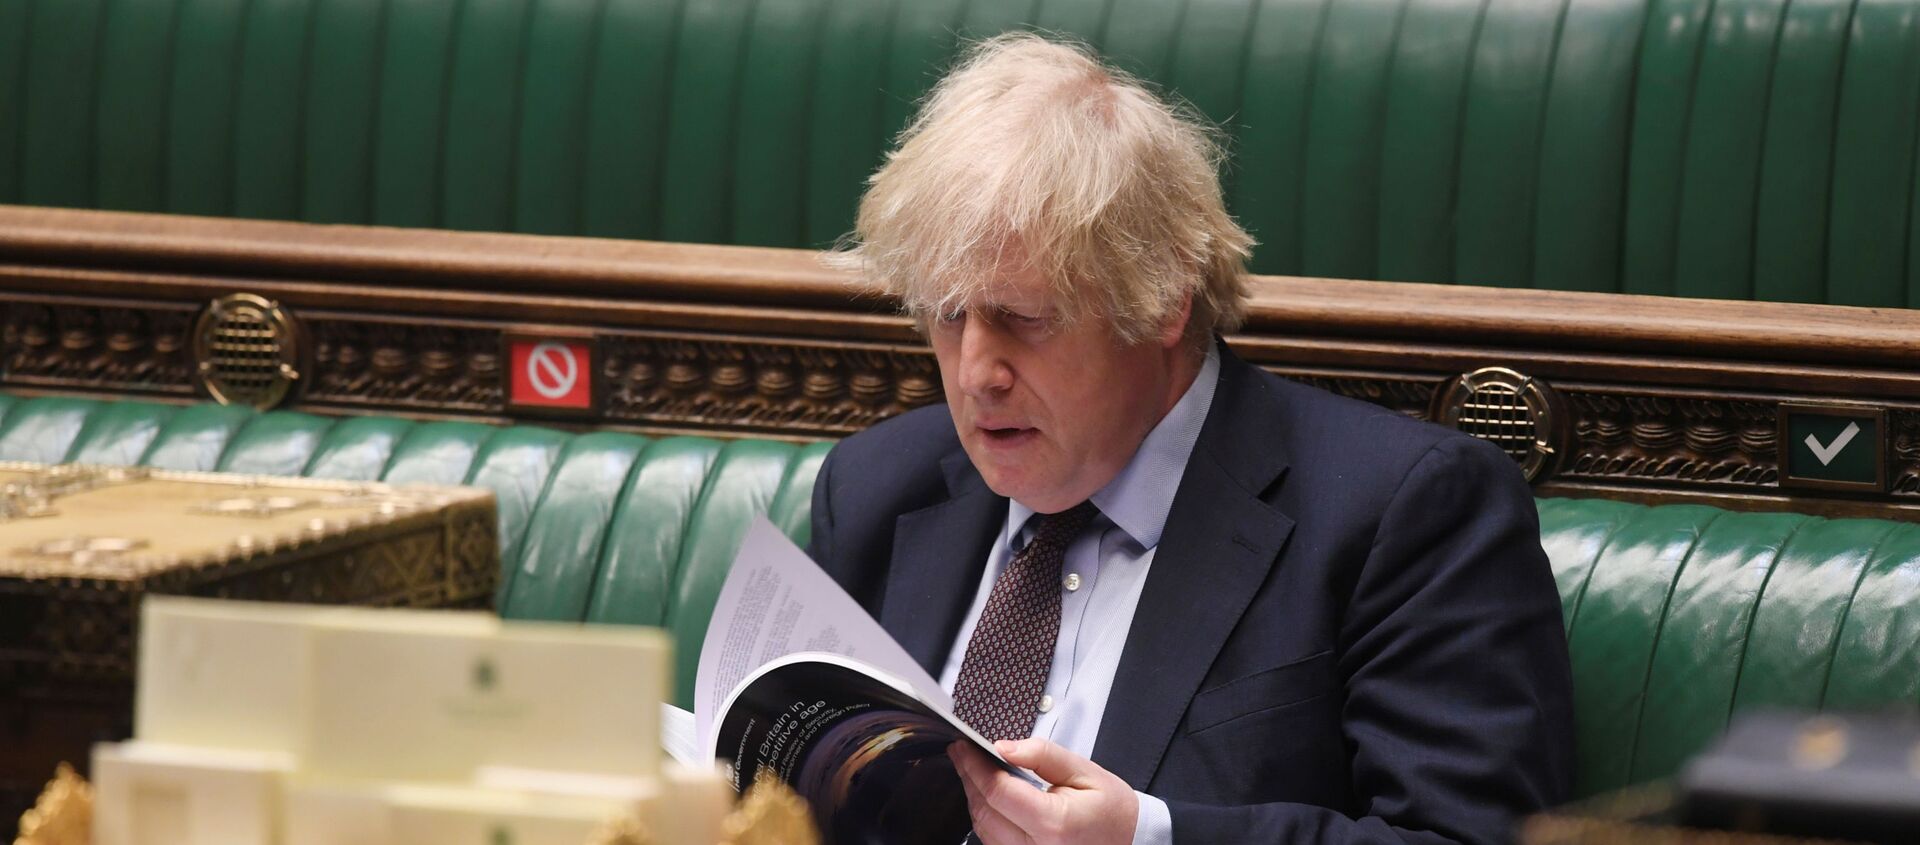 Britain's Prime Minister Boris Johnson attends a parliament session at the House of Commons in London, Britain March 16, 2021 - Sputnik International, 1920